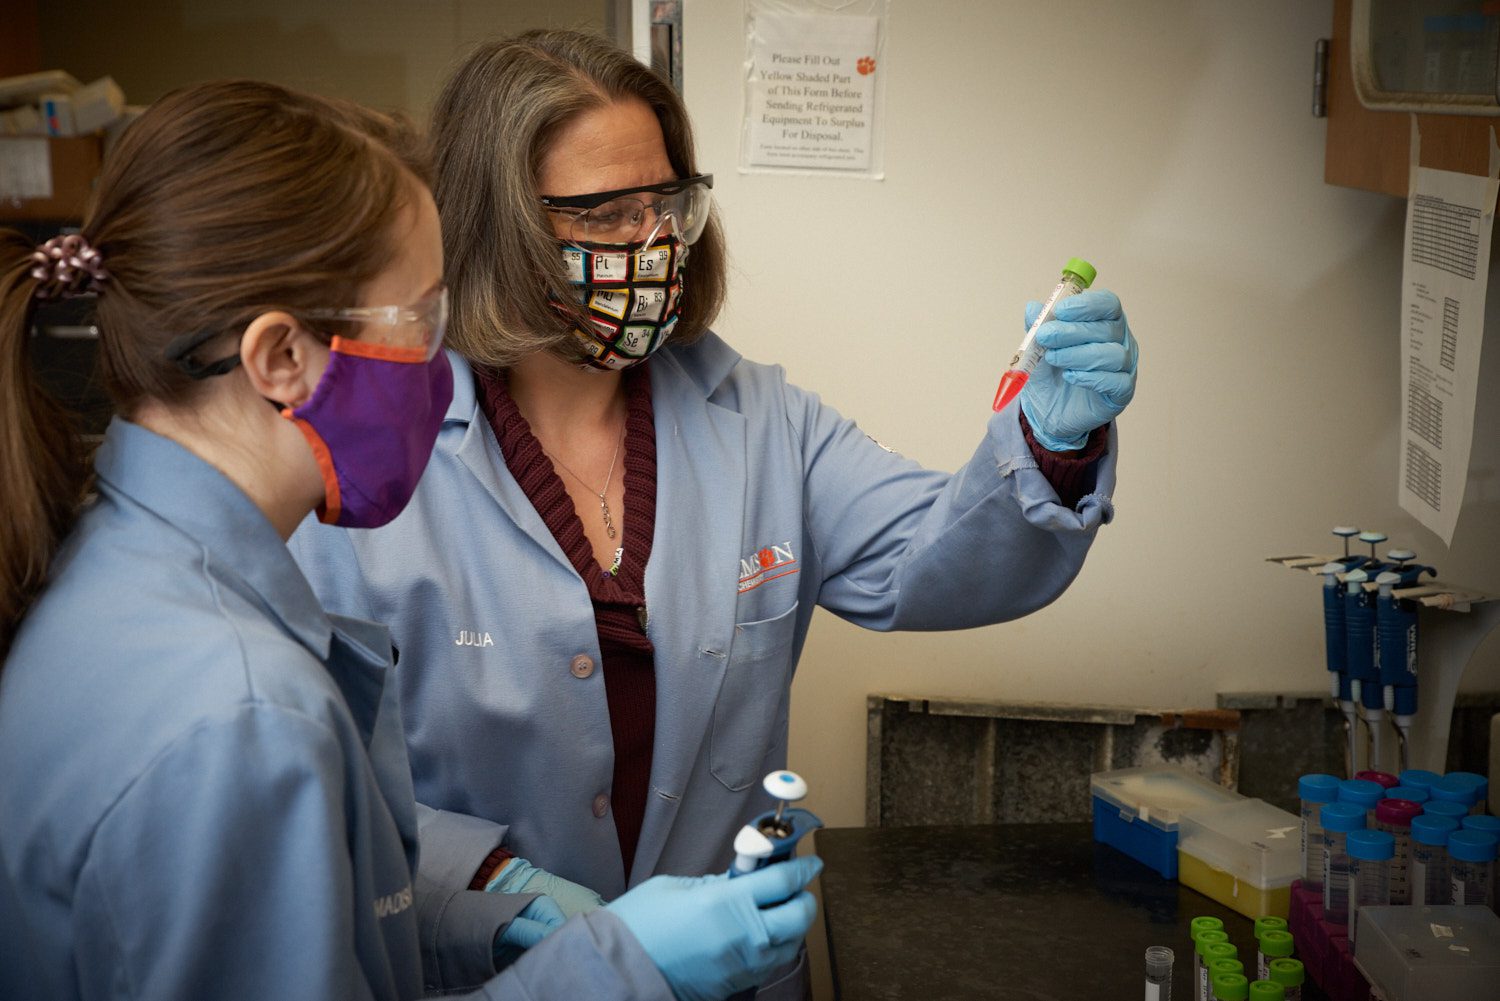 Woman wearing a blue lab coat and a periodic table mask holds a test tube with a red substance in it as another woman in a blue lab coat looks at it.